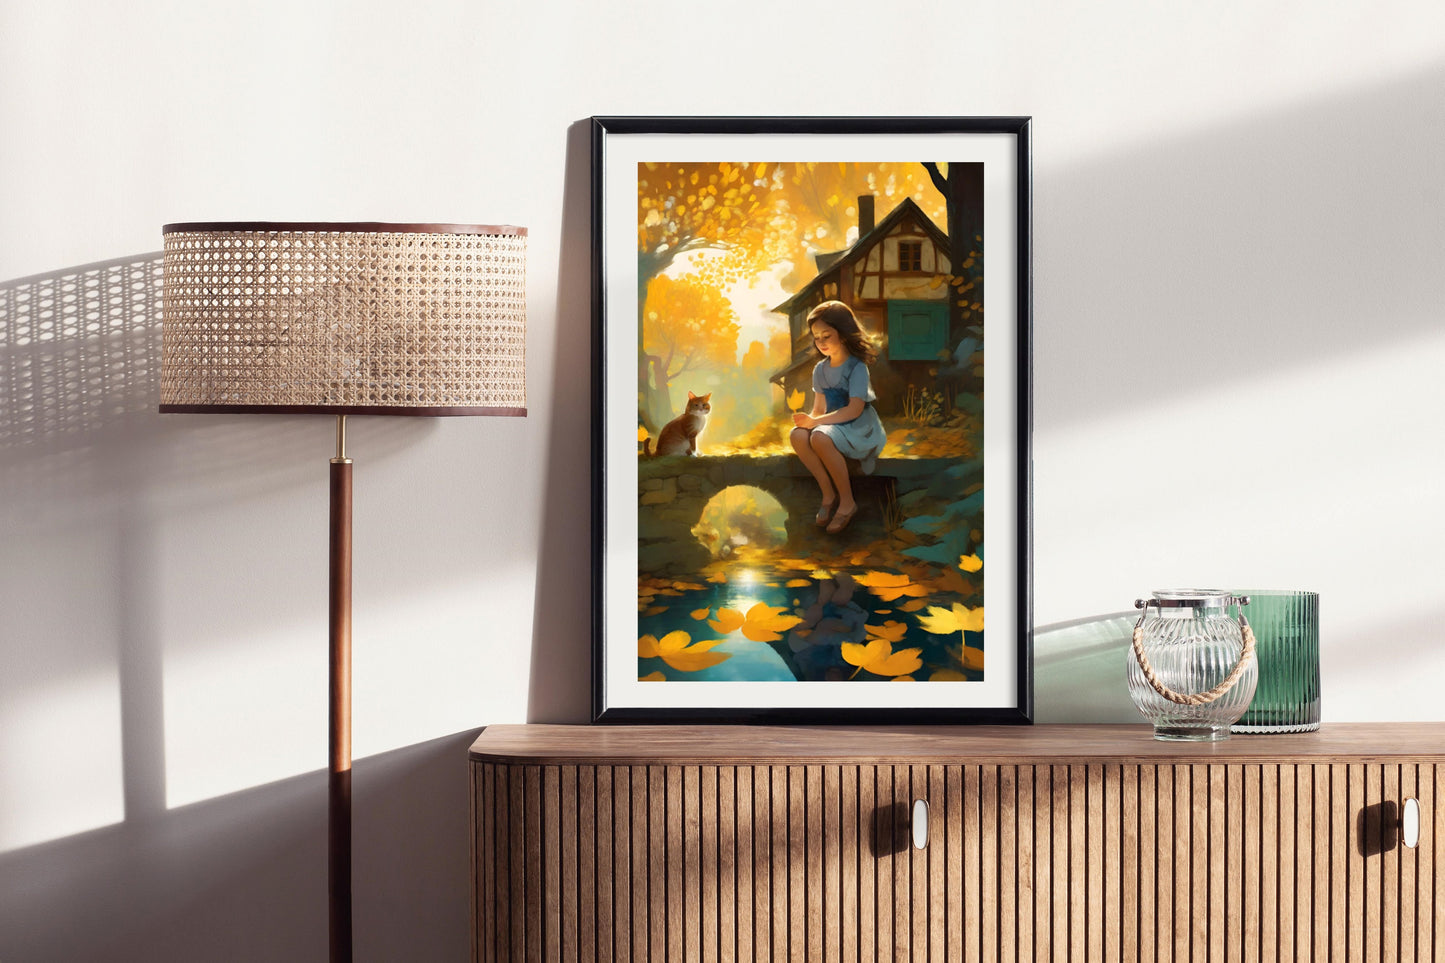 Daydreams - Illustrated Print by Thomas Little